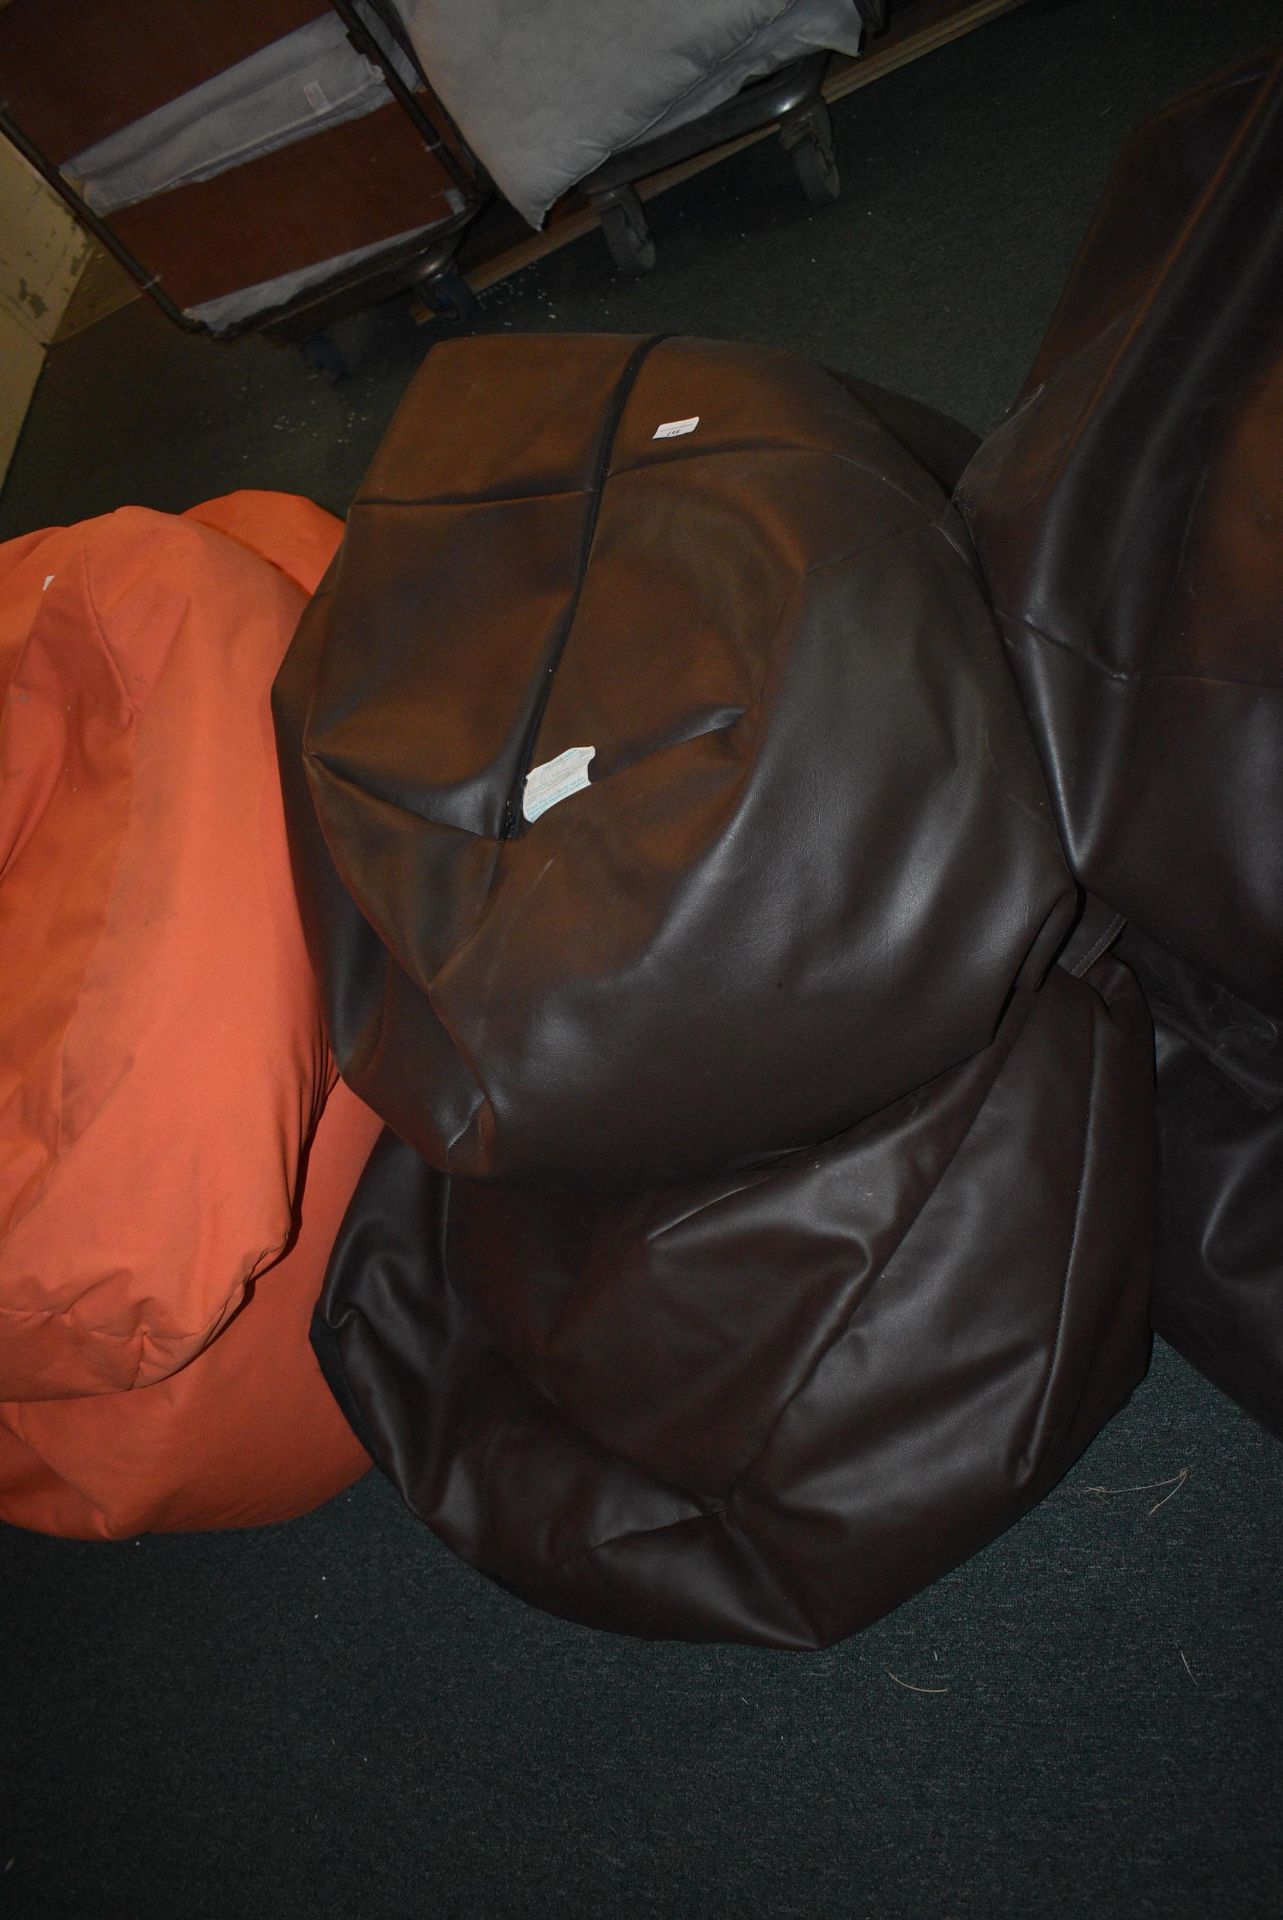 *Three Brown Faux Leather Beanbags